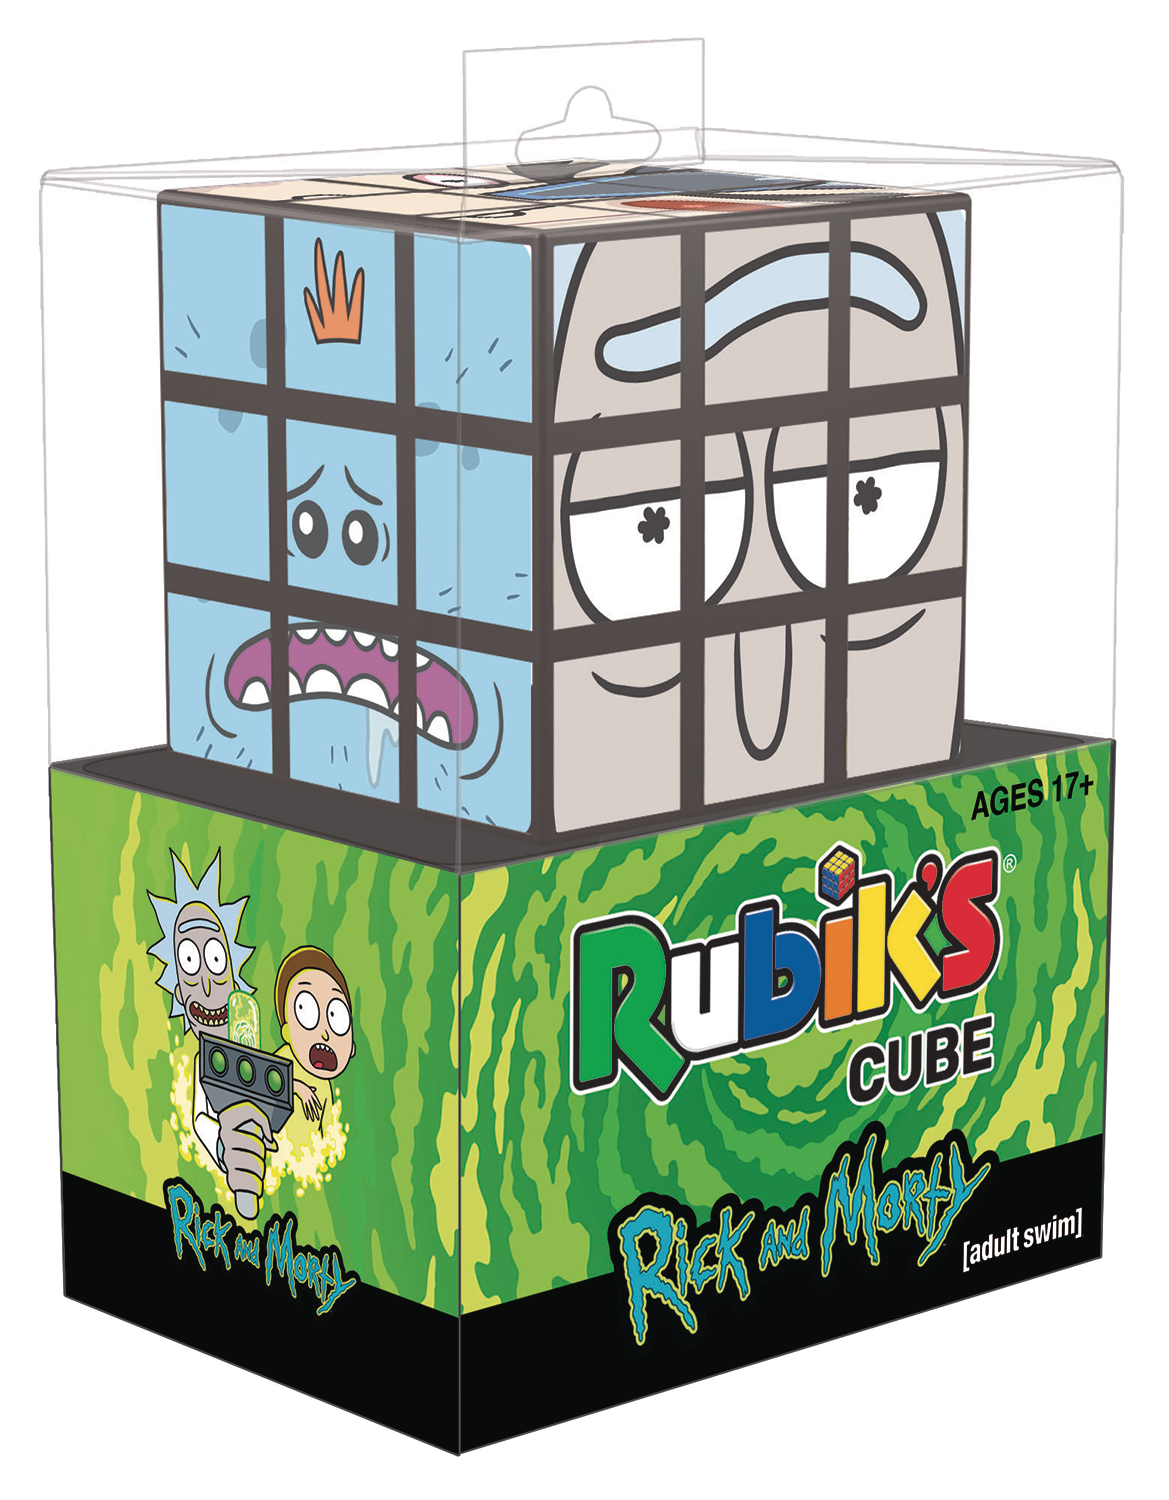 Rubiks Cube Rick and Morty